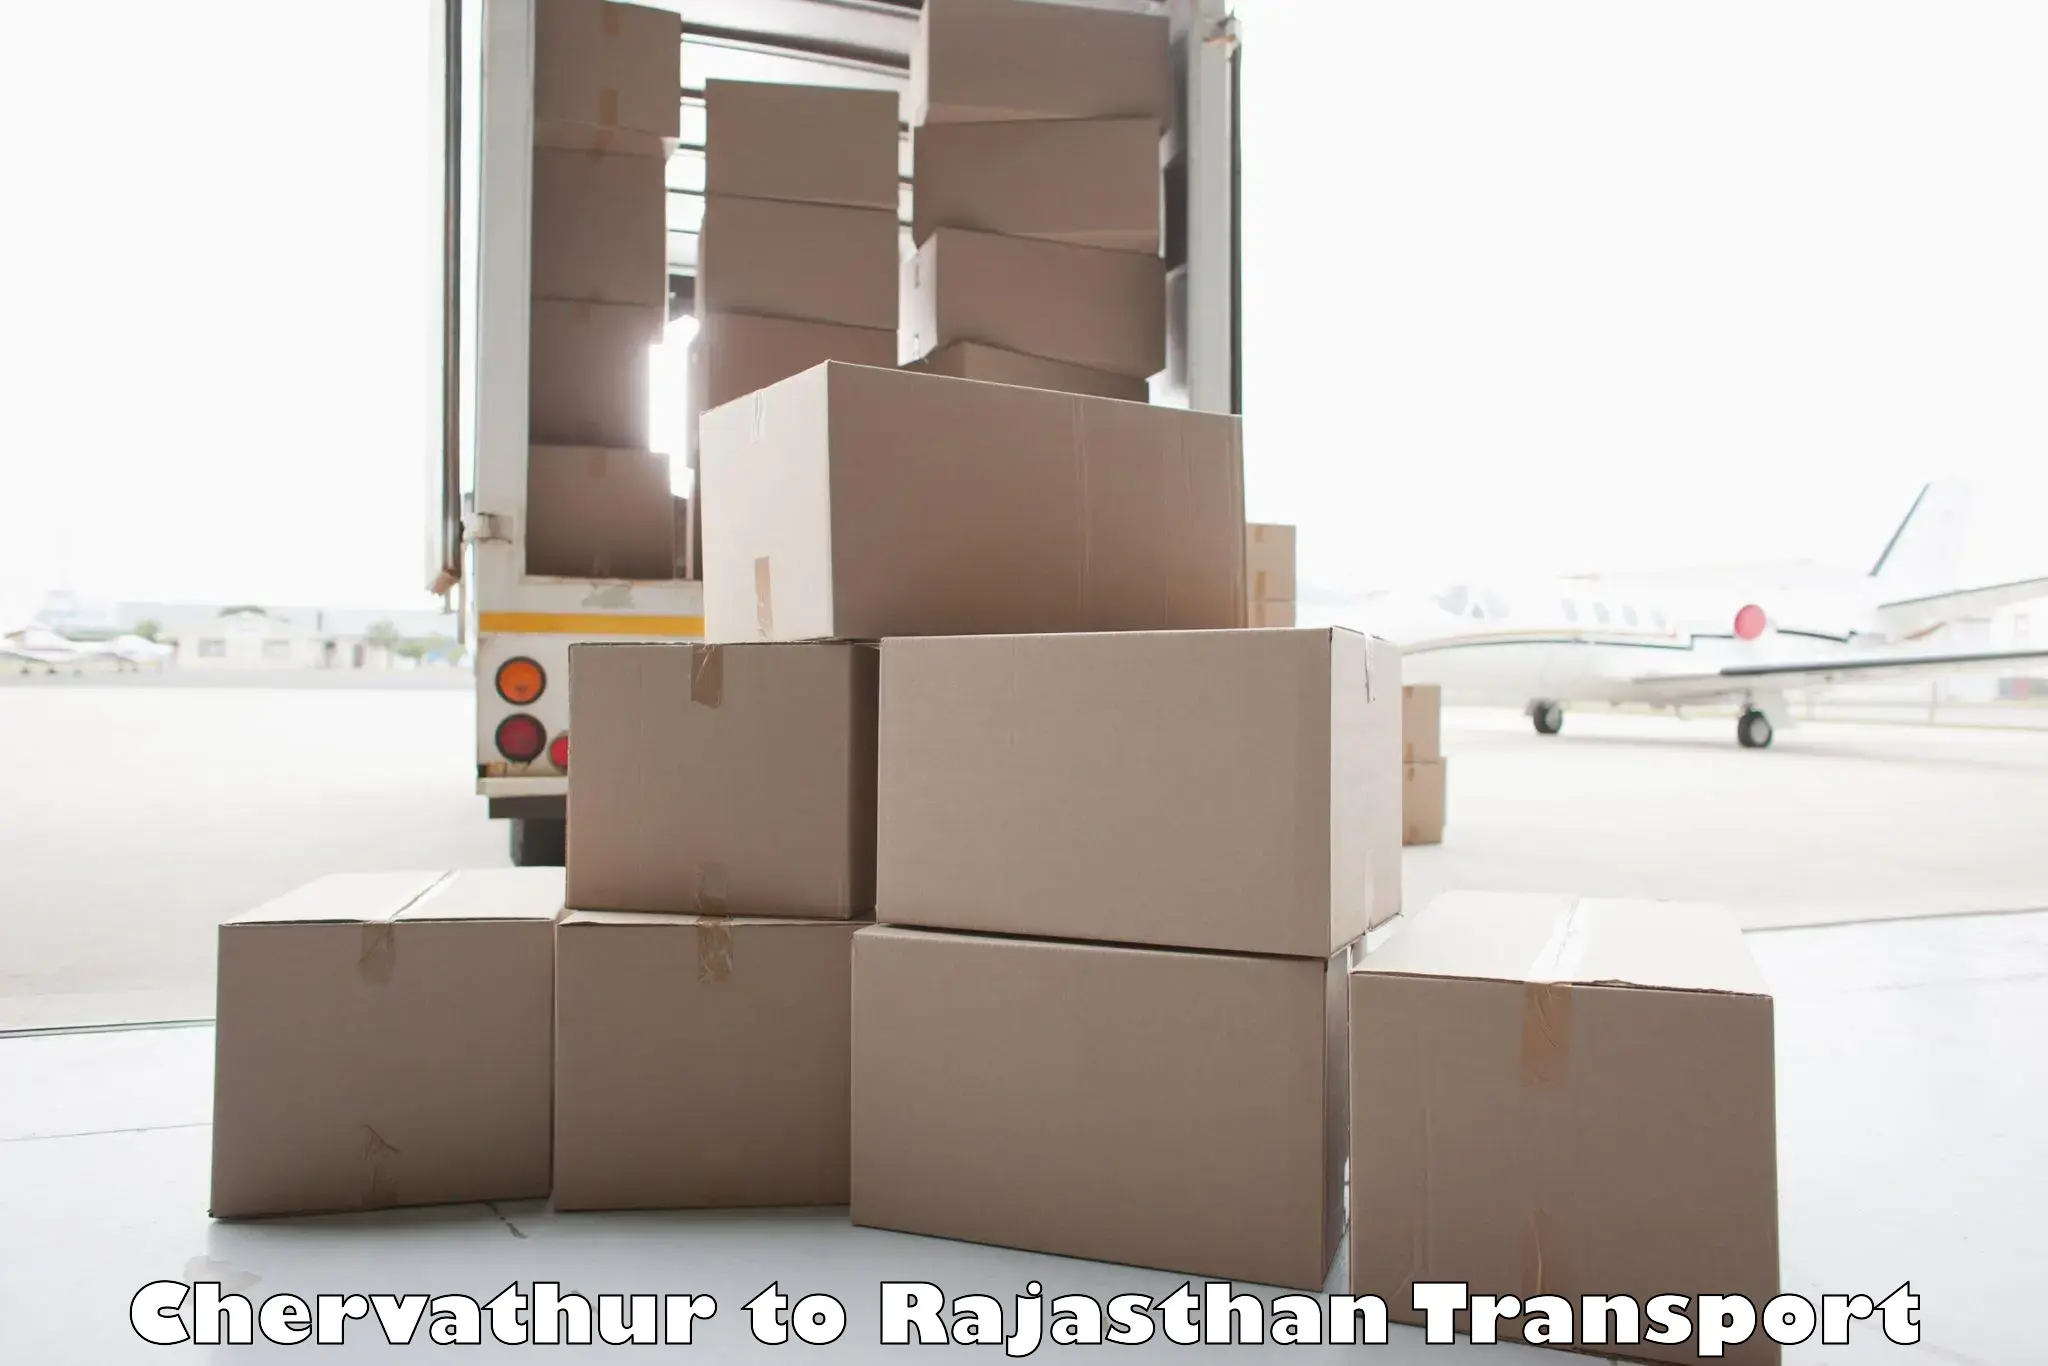 Container transport service in Chervathur to Kaman